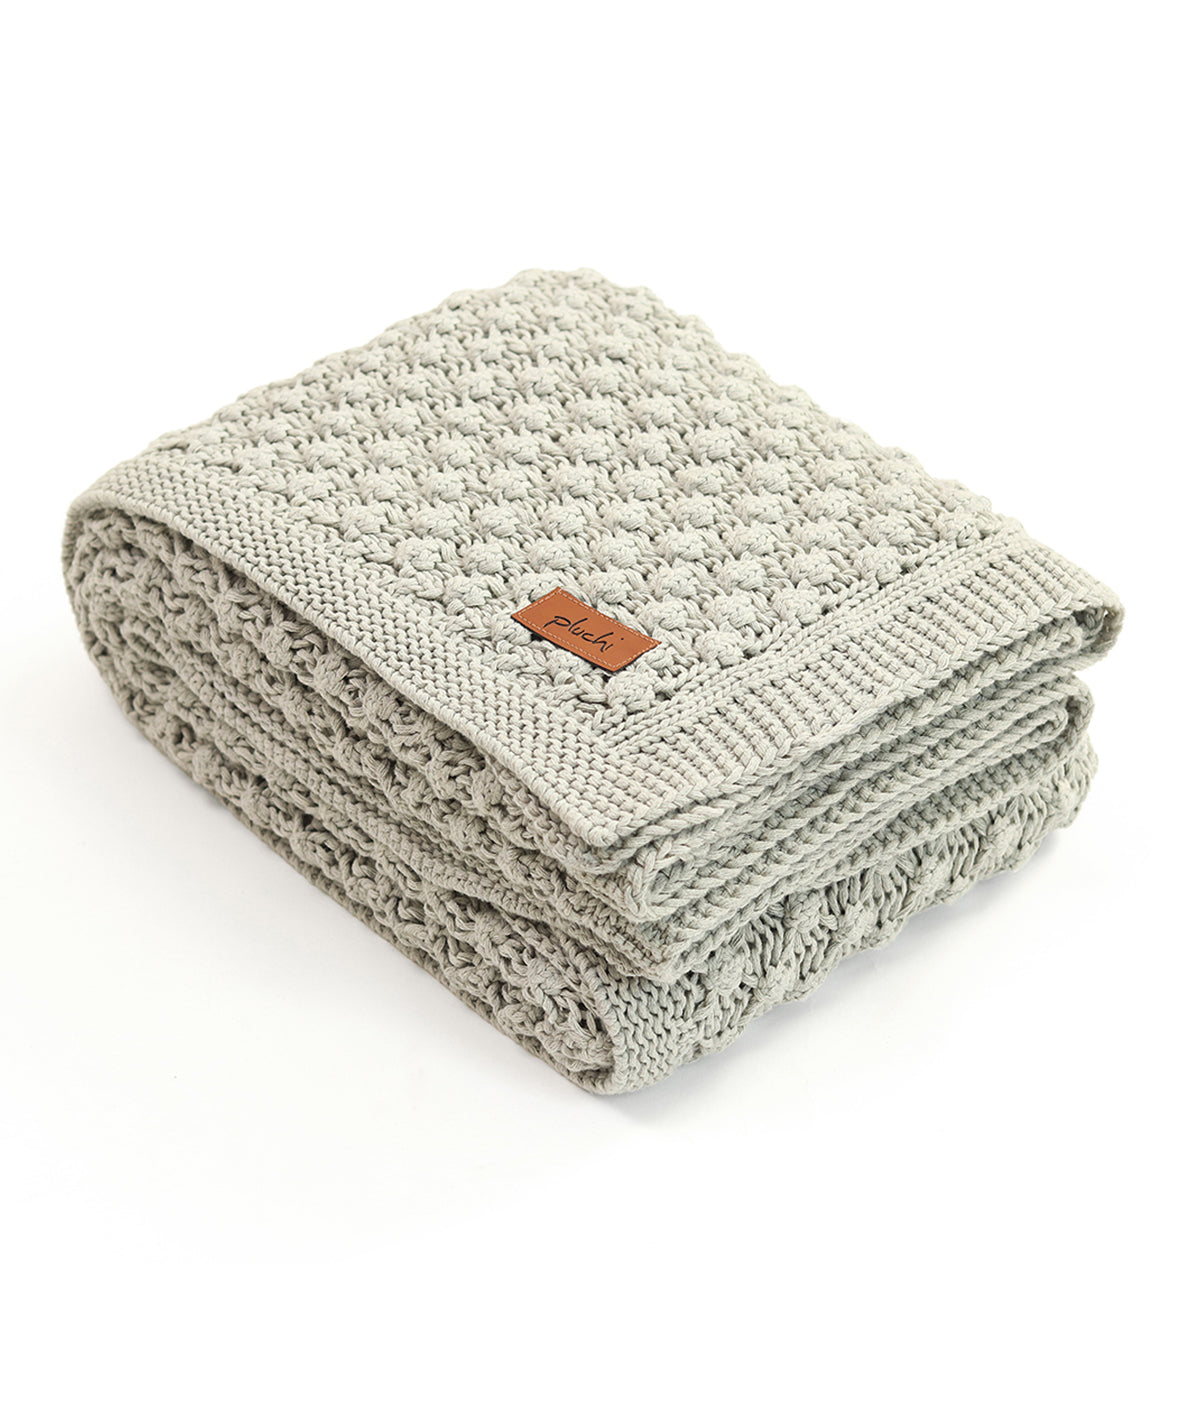 Popcorn Knit Vanilla Grey Melange Color Cotton Knitted Throw /Blanket  For Round The Year Use